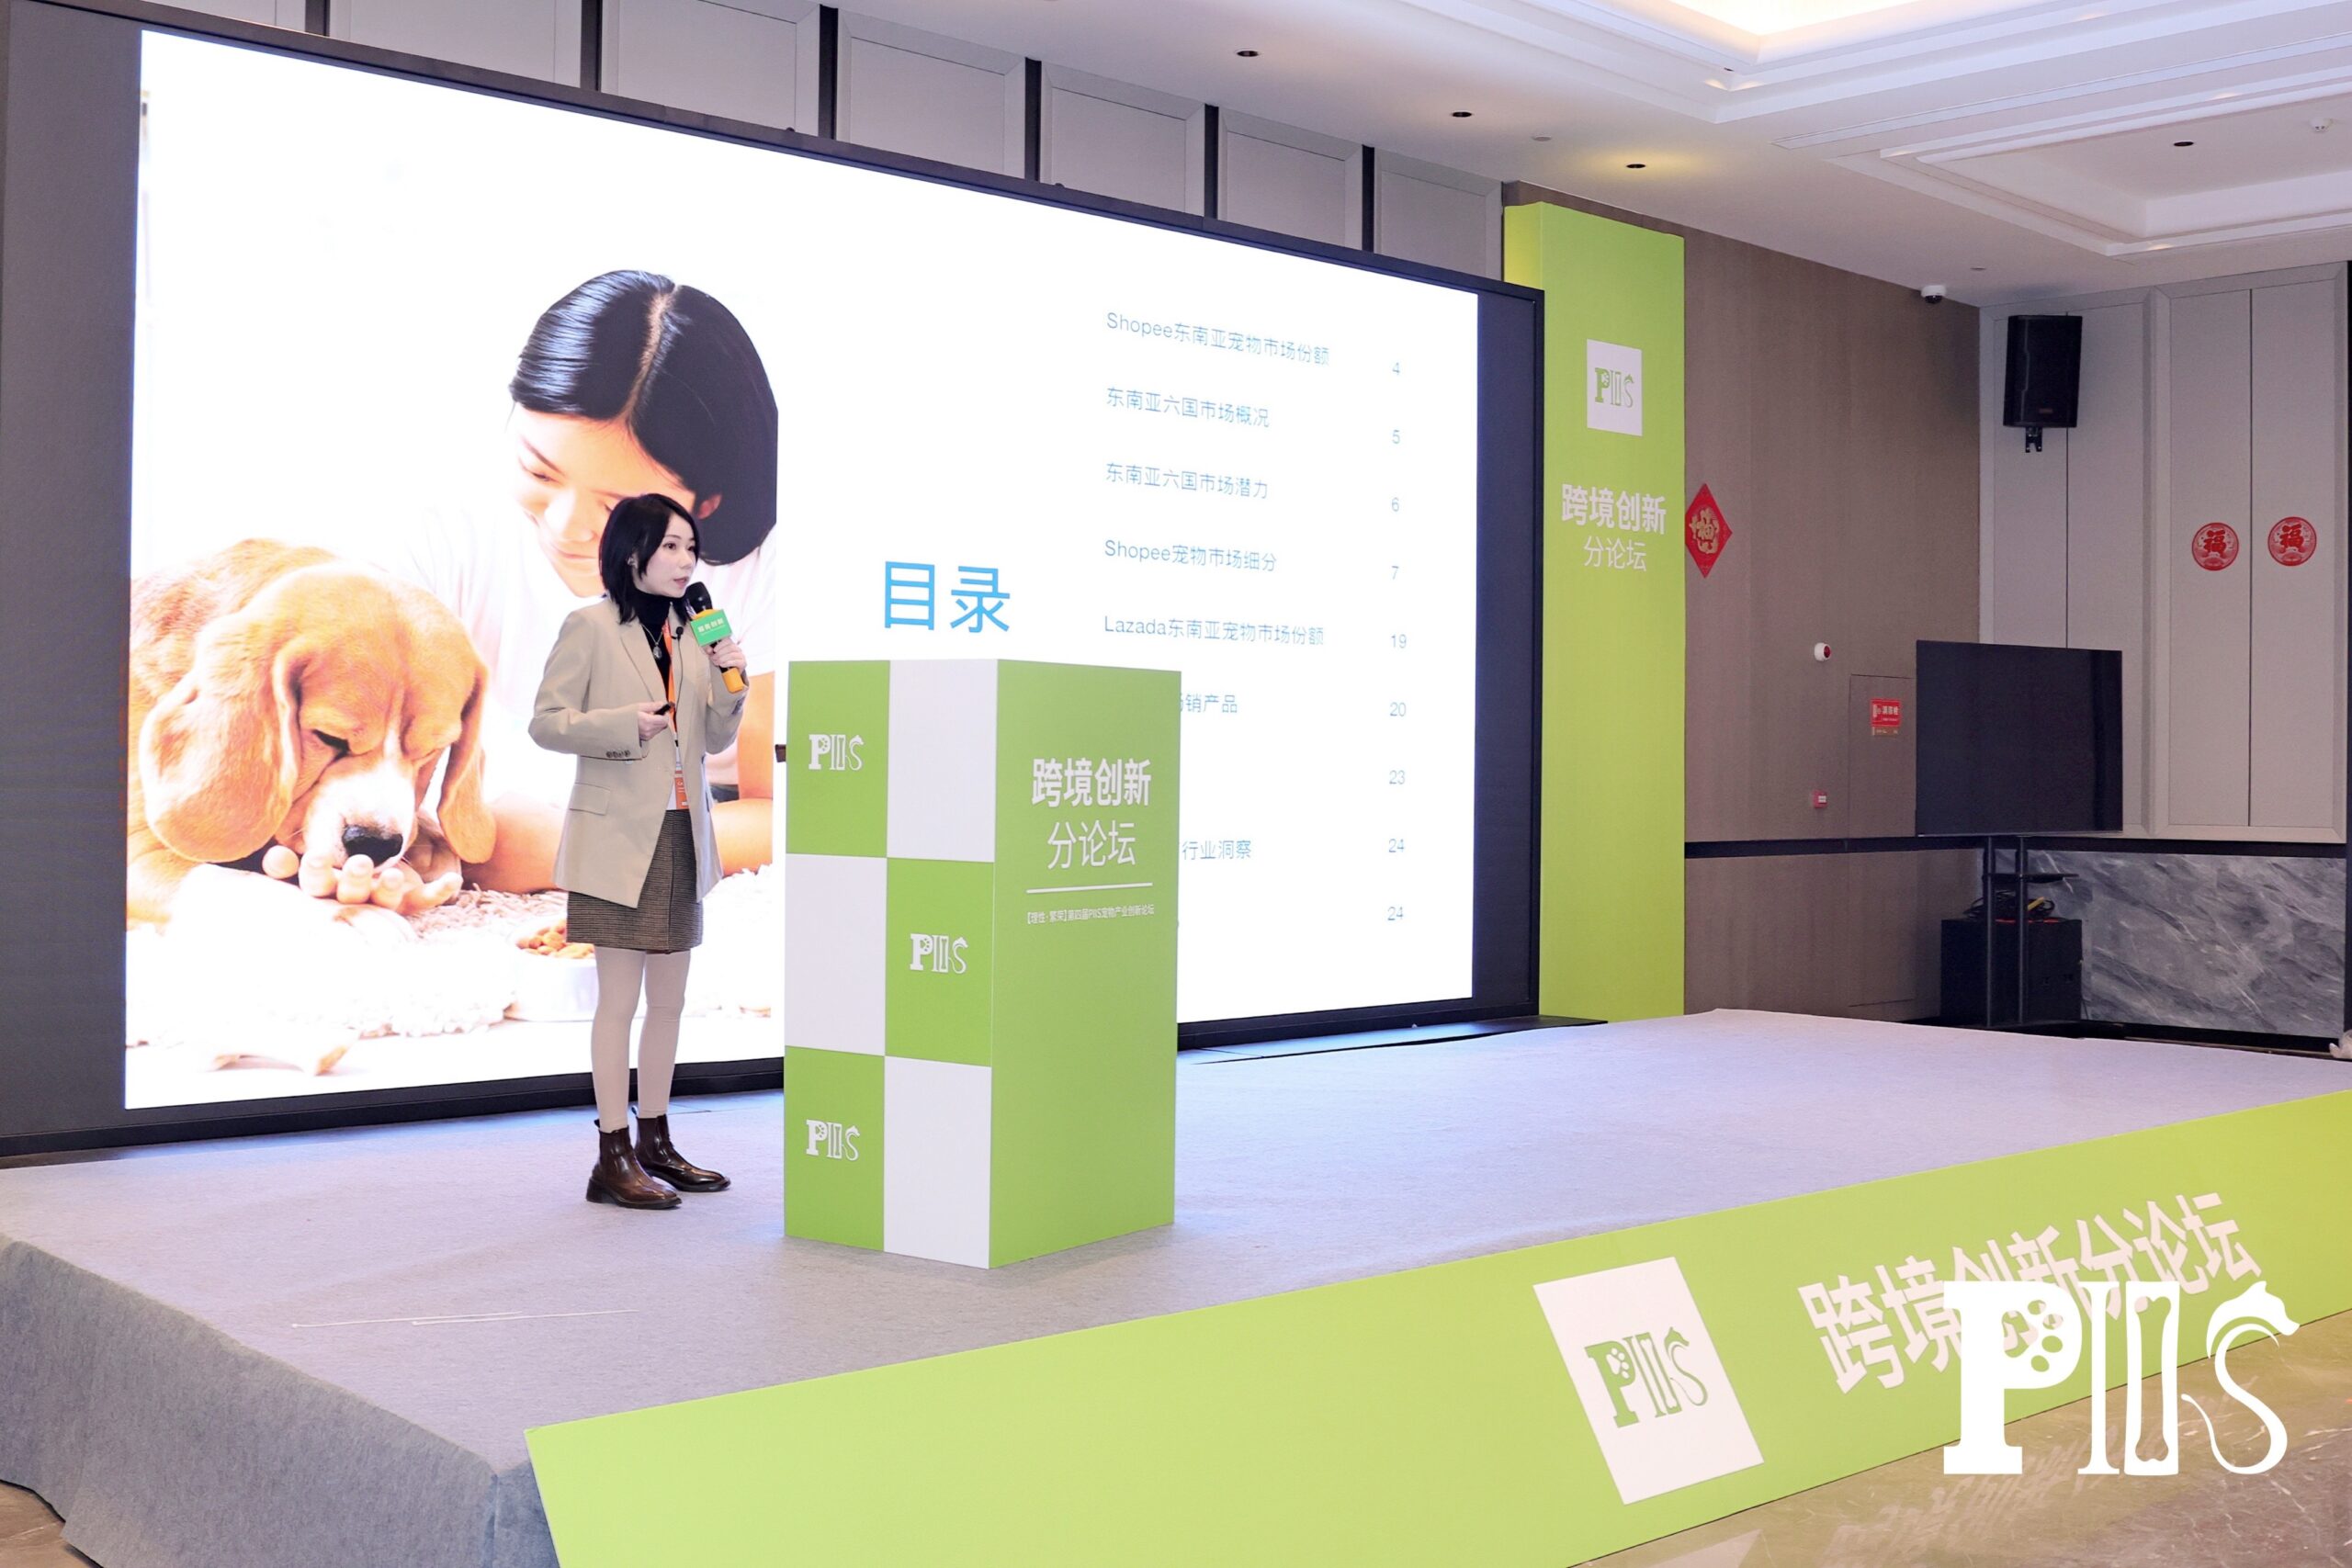 Catherine shares the pet e-commerce market in Southeast Asia